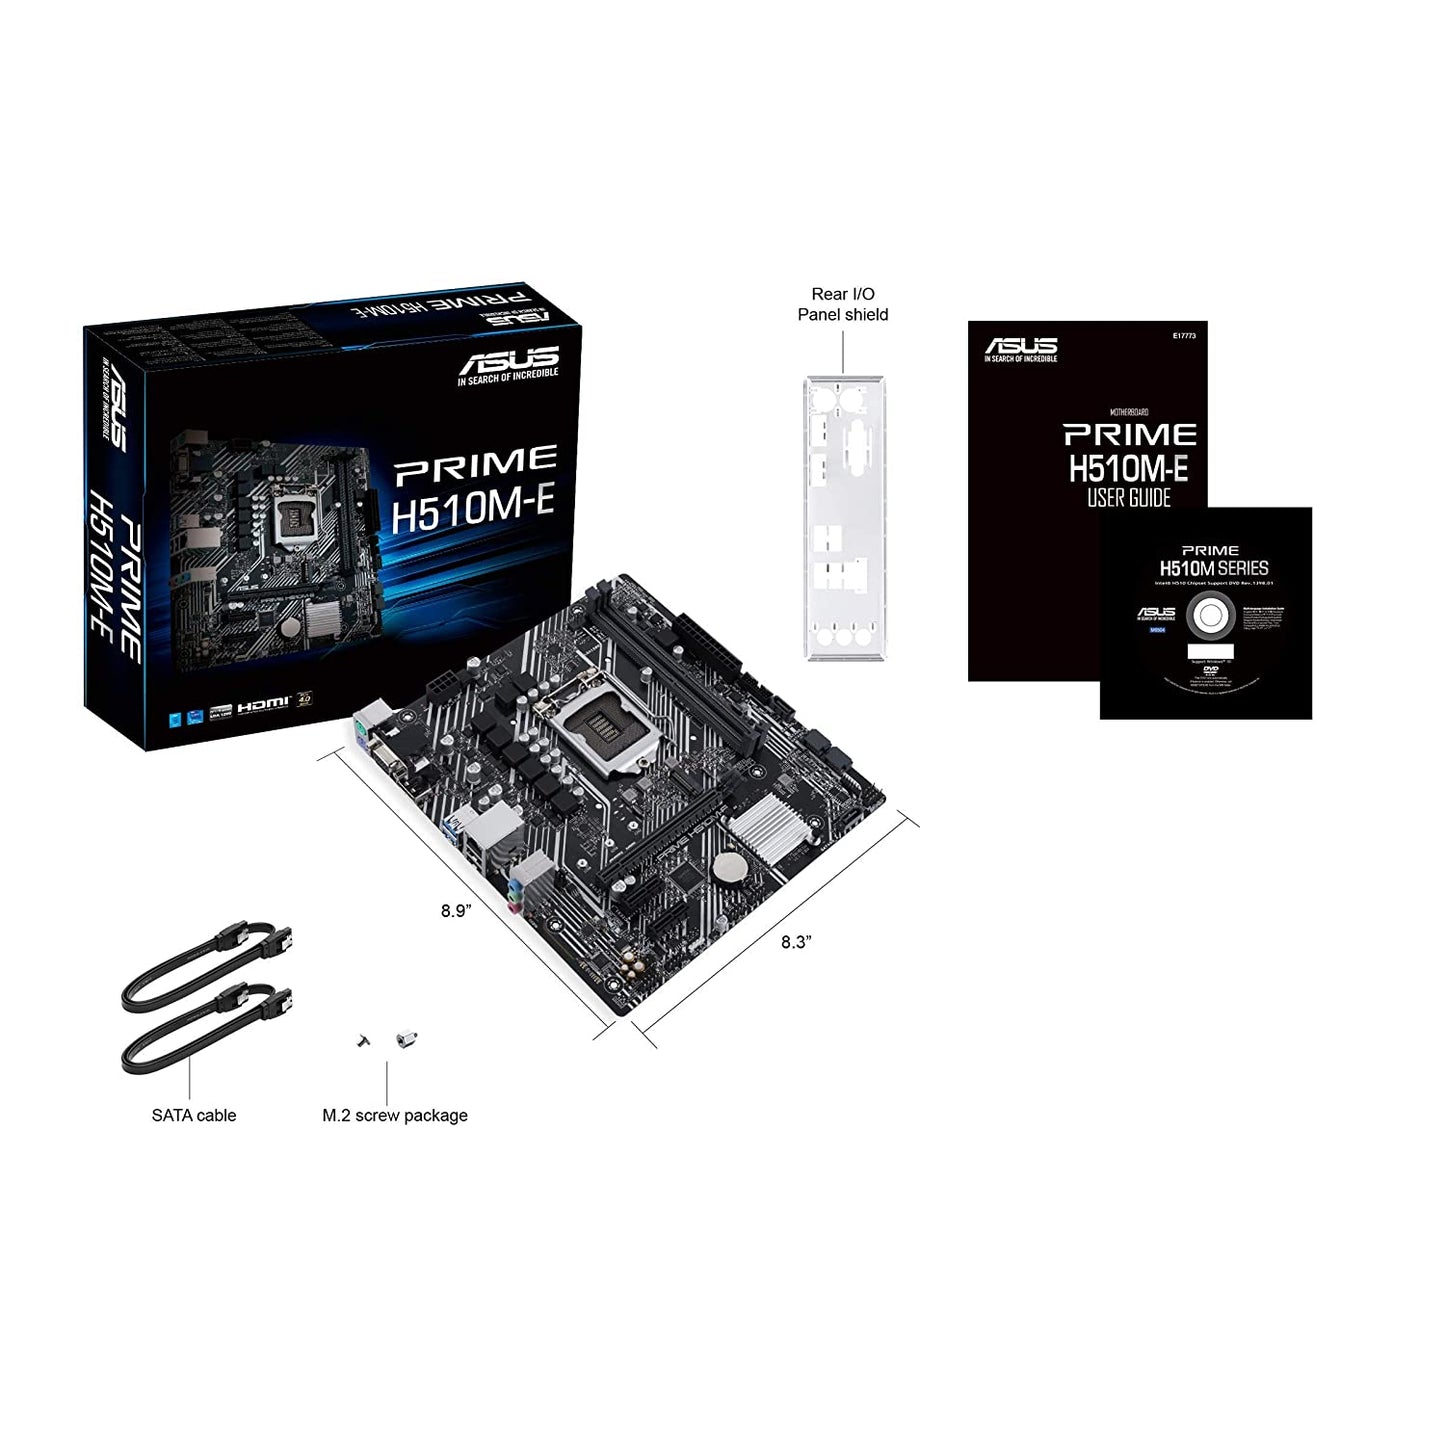 ASUS Prime A320M-K AM4 uATX Motherboard with LED Lighting DDR4 32Gb/s M.2 HDMI SATA 6Gb/s USB 3.0